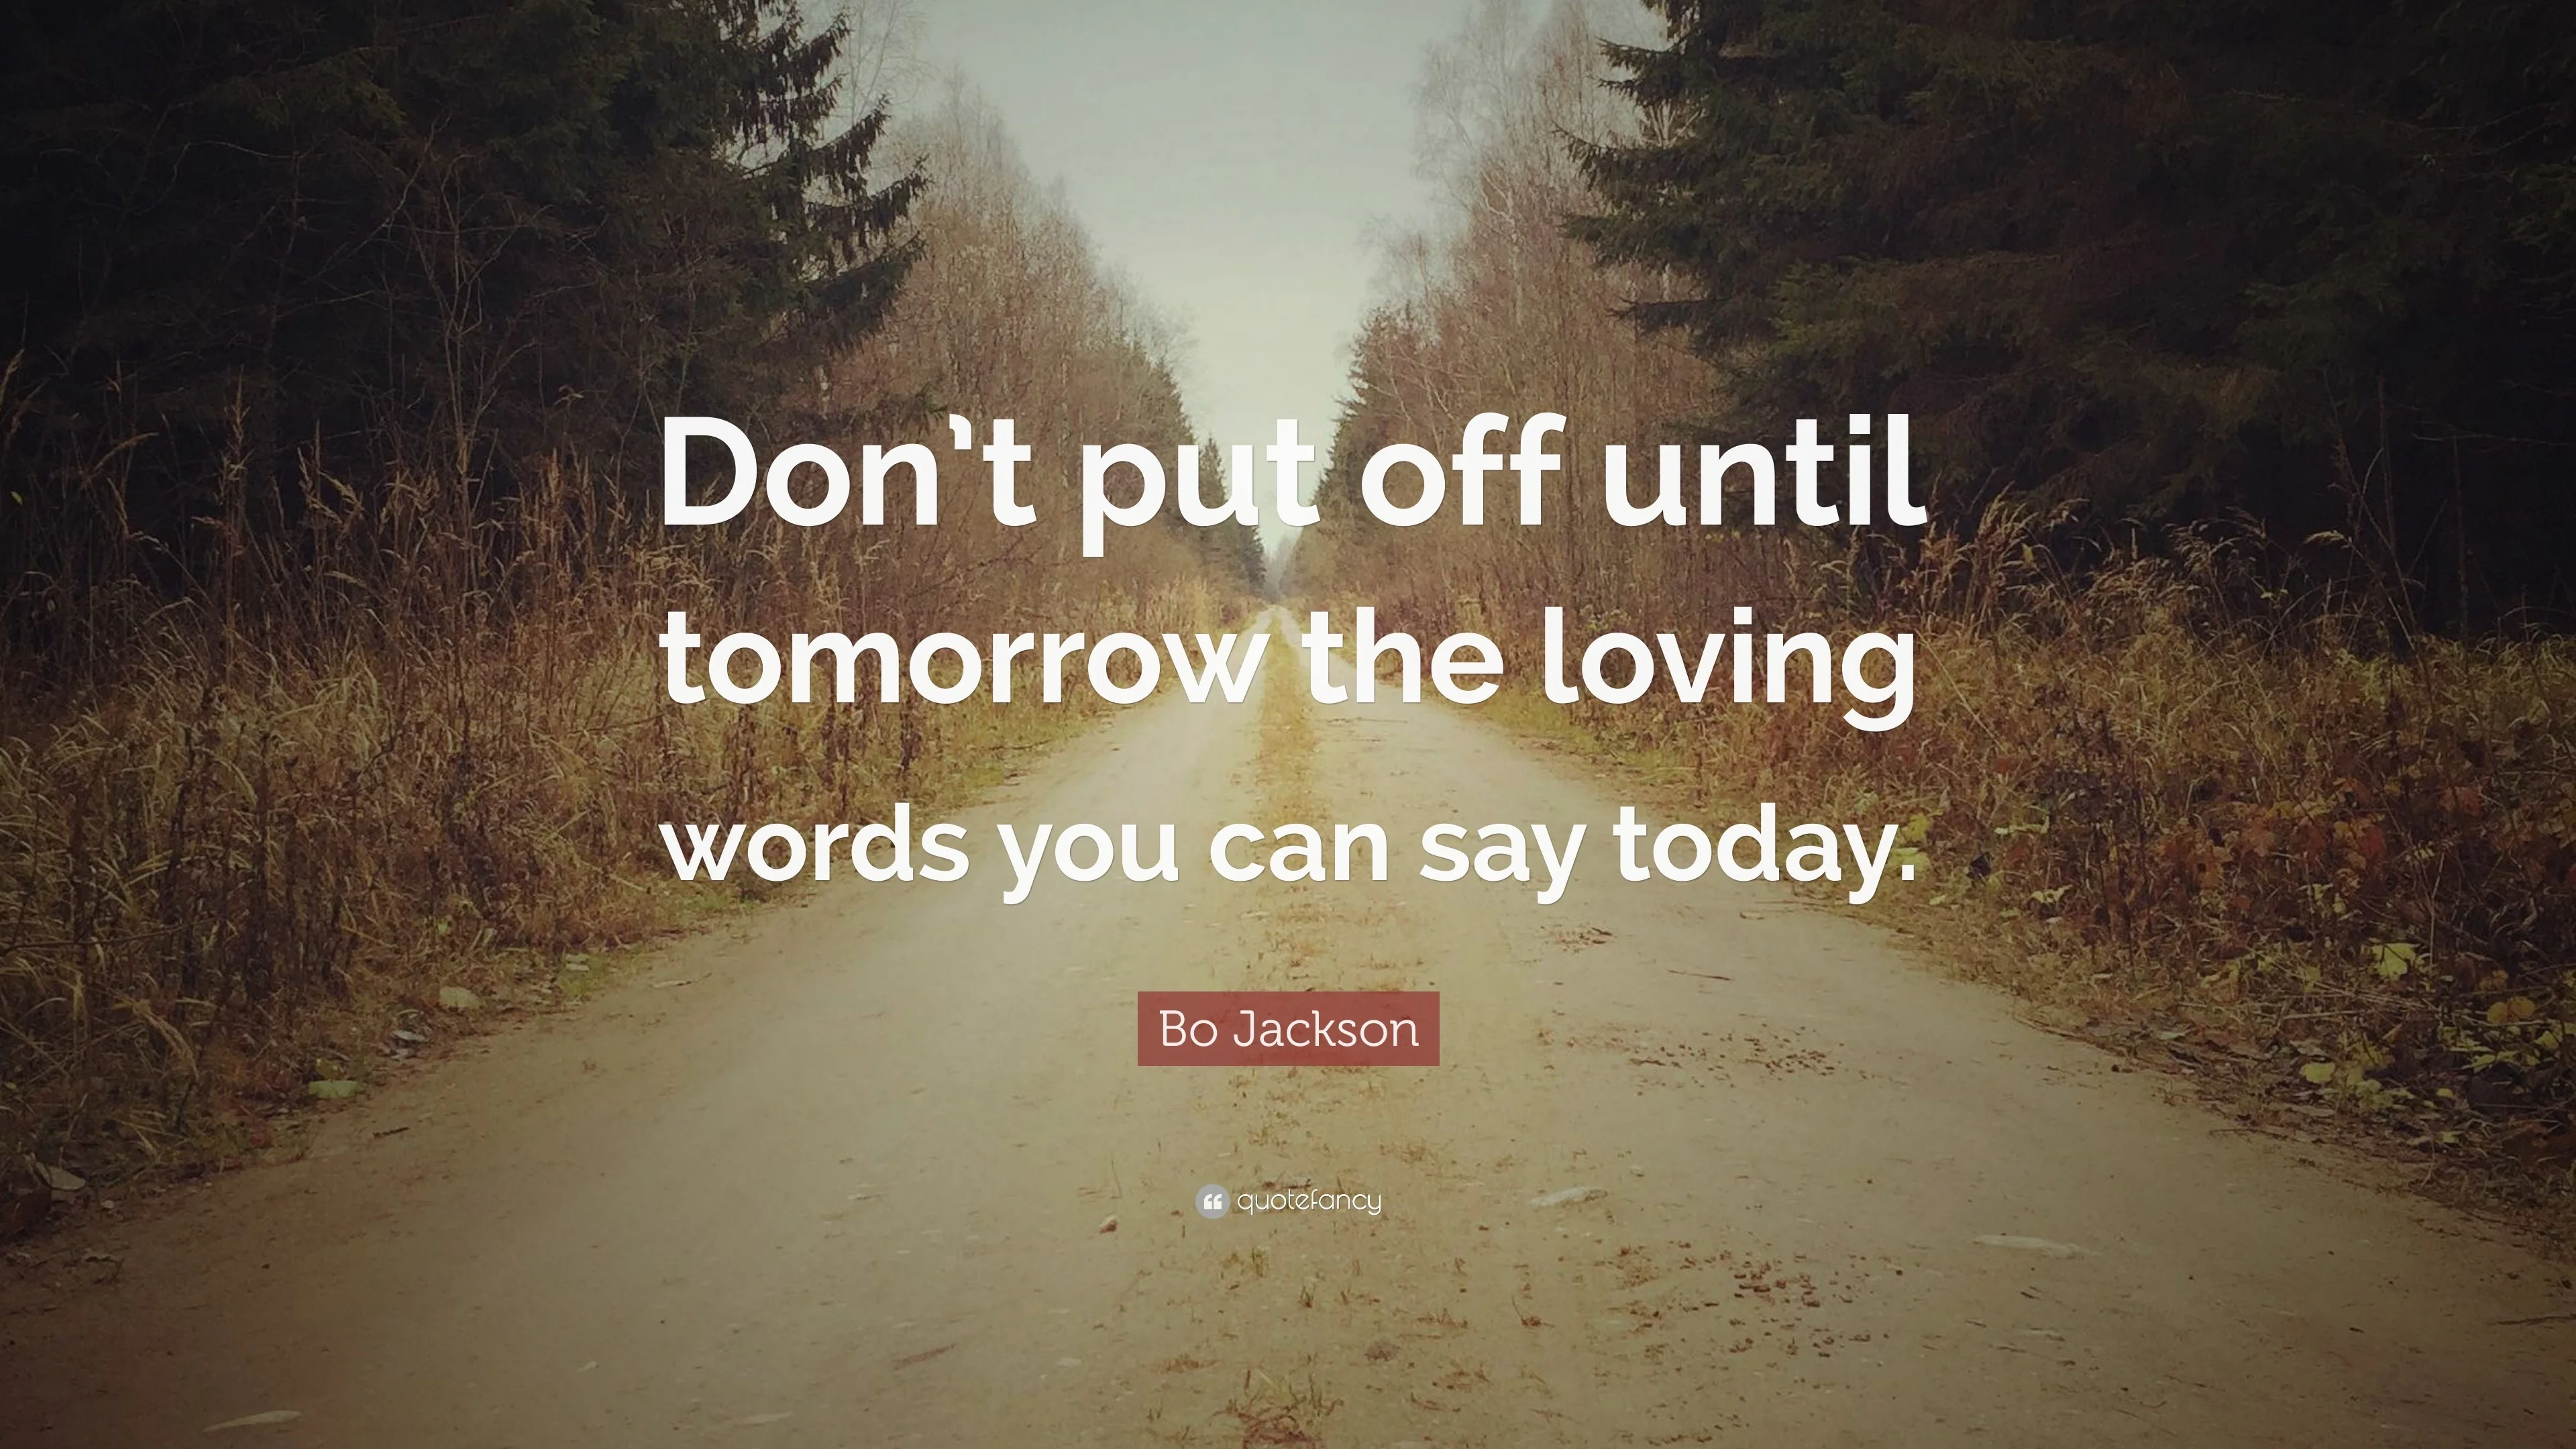 Bo Jackson Quote: “Don't put off until tomorrow the loving words you